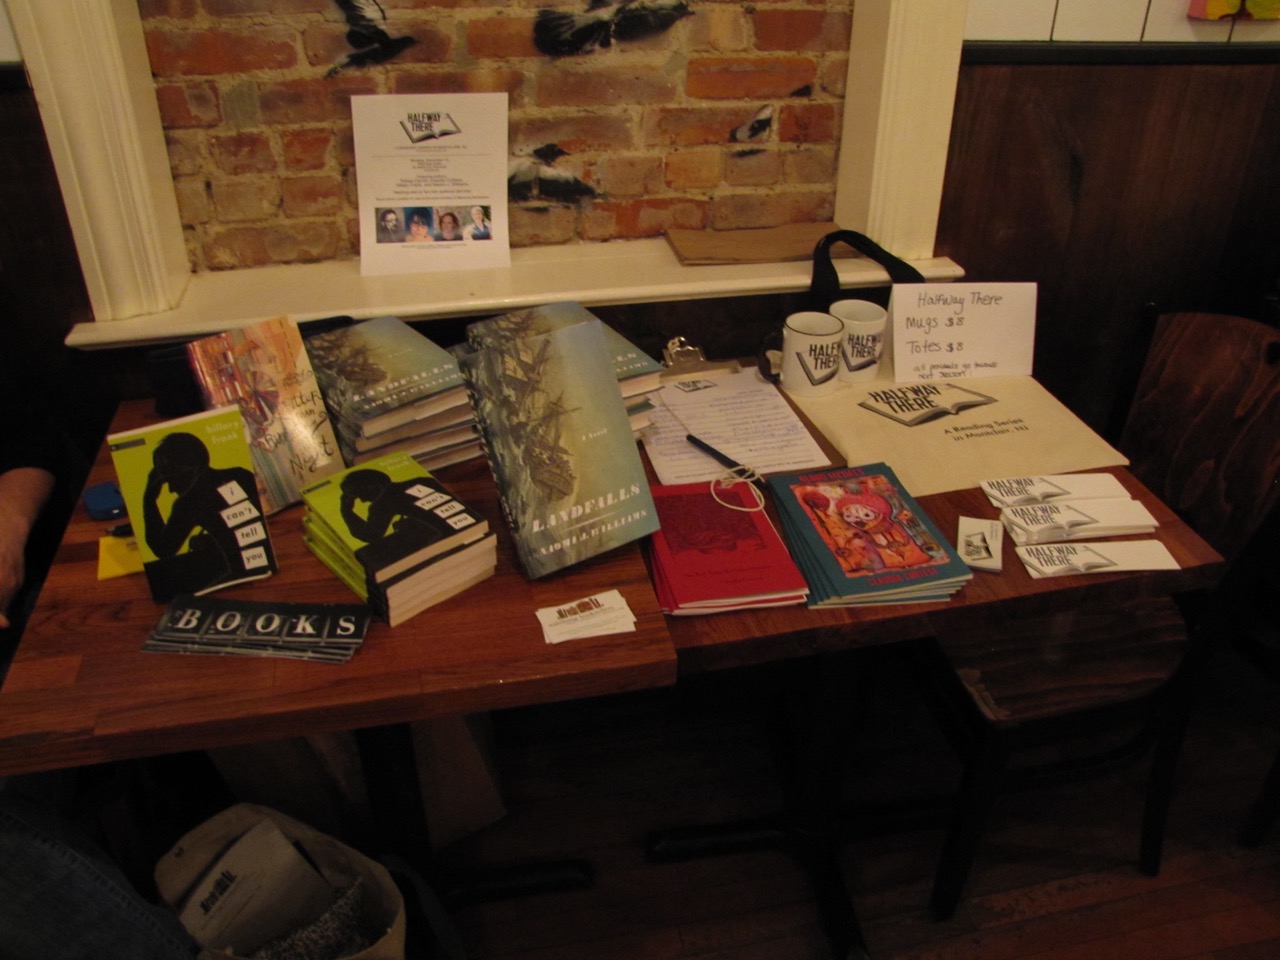 Books from Watchung Booksellers and Merch